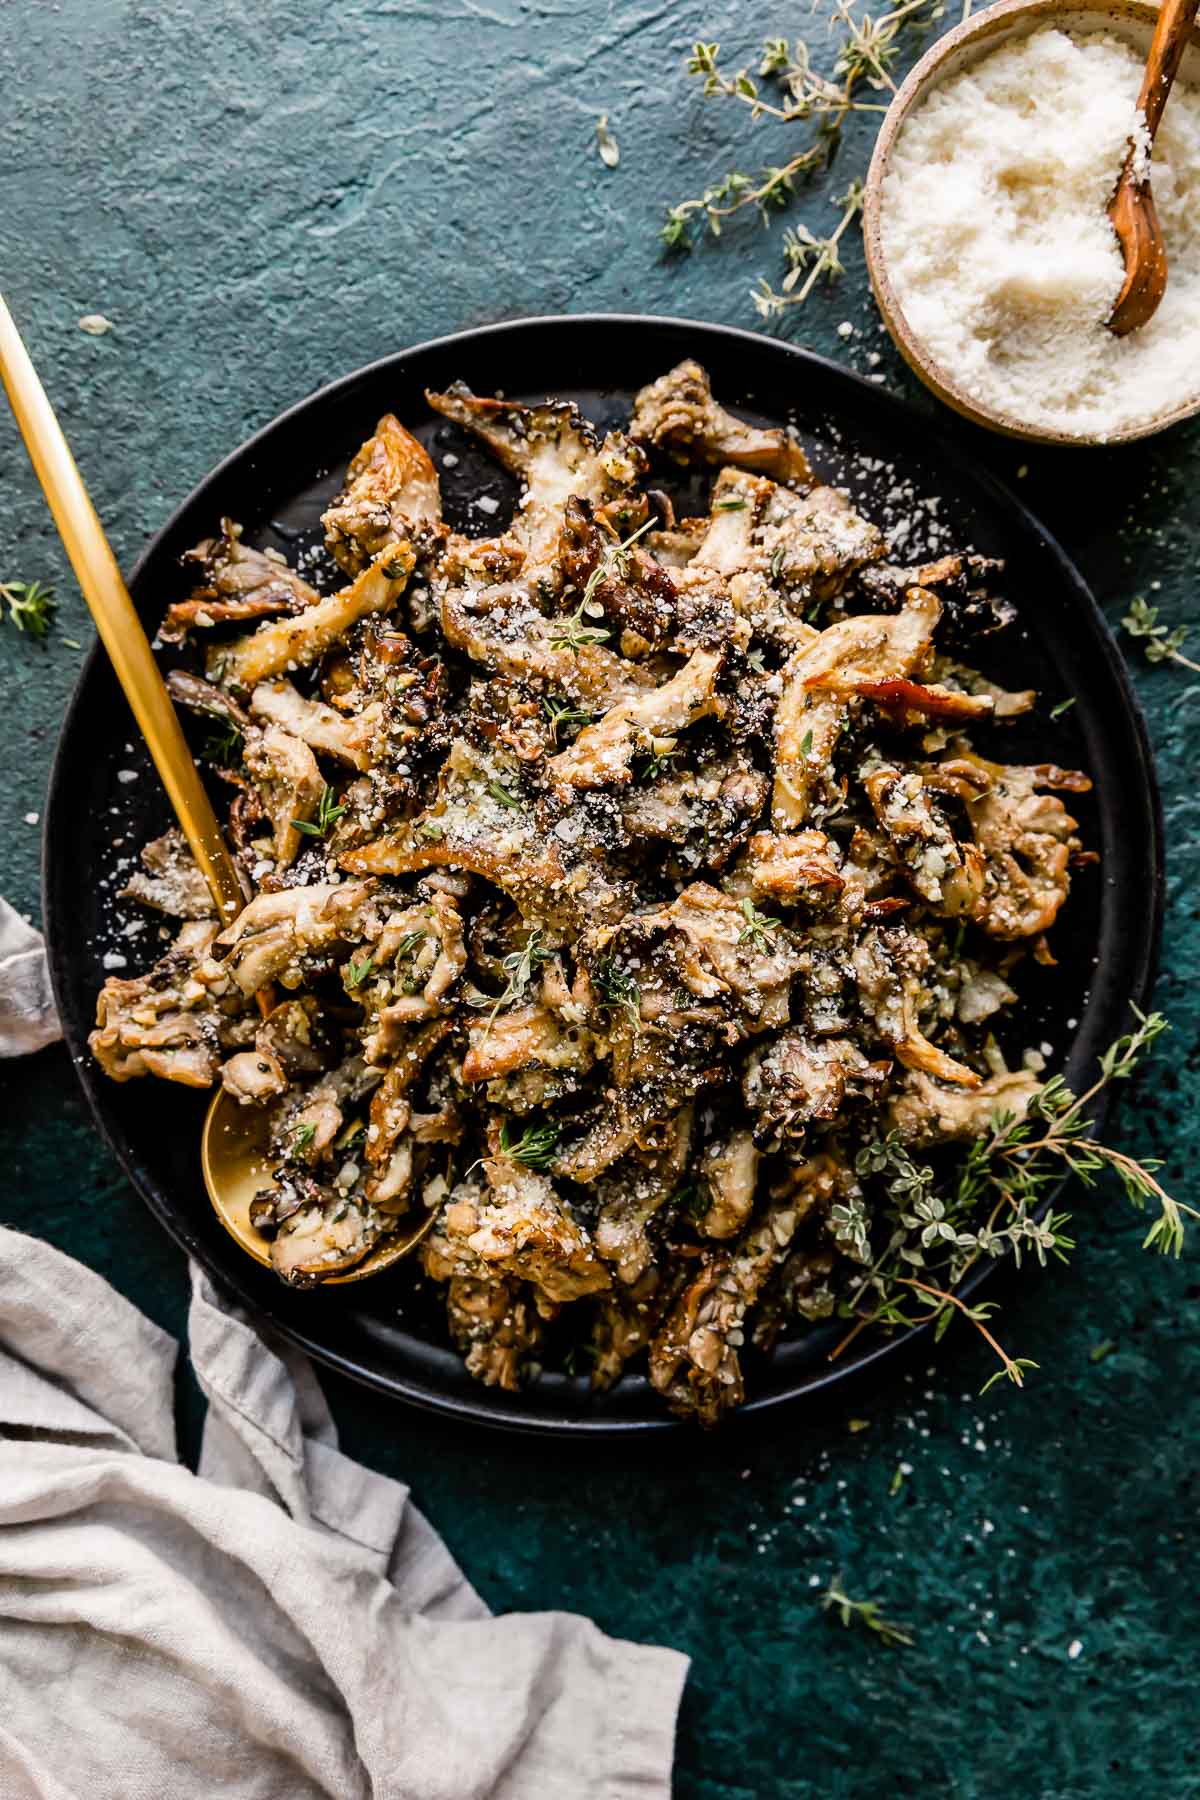 https://playswellwithbutter.com/wp-content/uploads/2022/11/Crispy-Roasted-Mushrooms-with-Parmesan-10.jpg